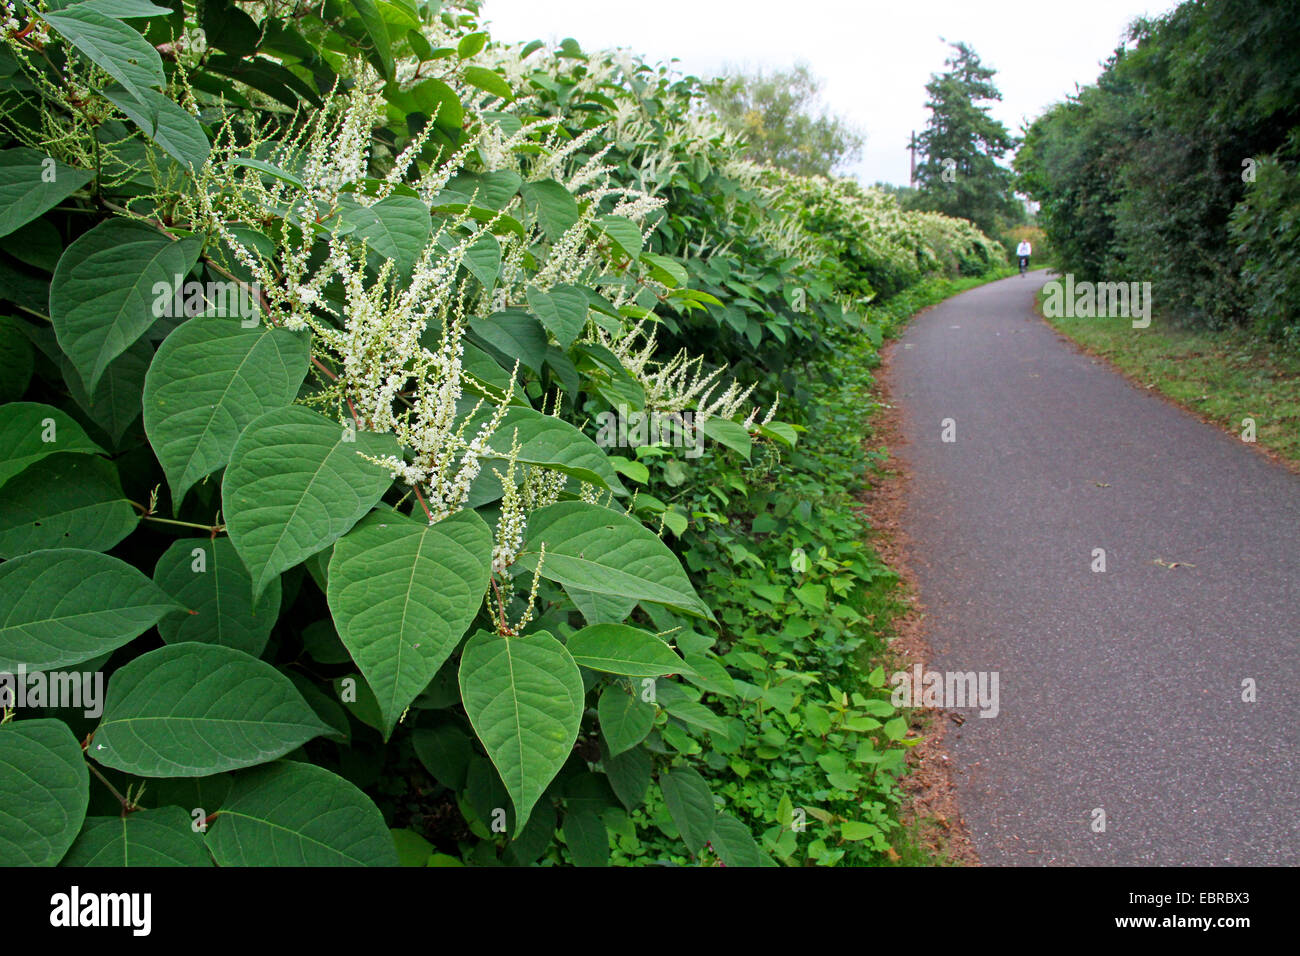 Japanese Knotweed (Fallopia japonica, Reynoutria japonica), blooming plants at Ruhr-Valley Cycleway, Germany, Nordrhein Westfalen Stock Photo